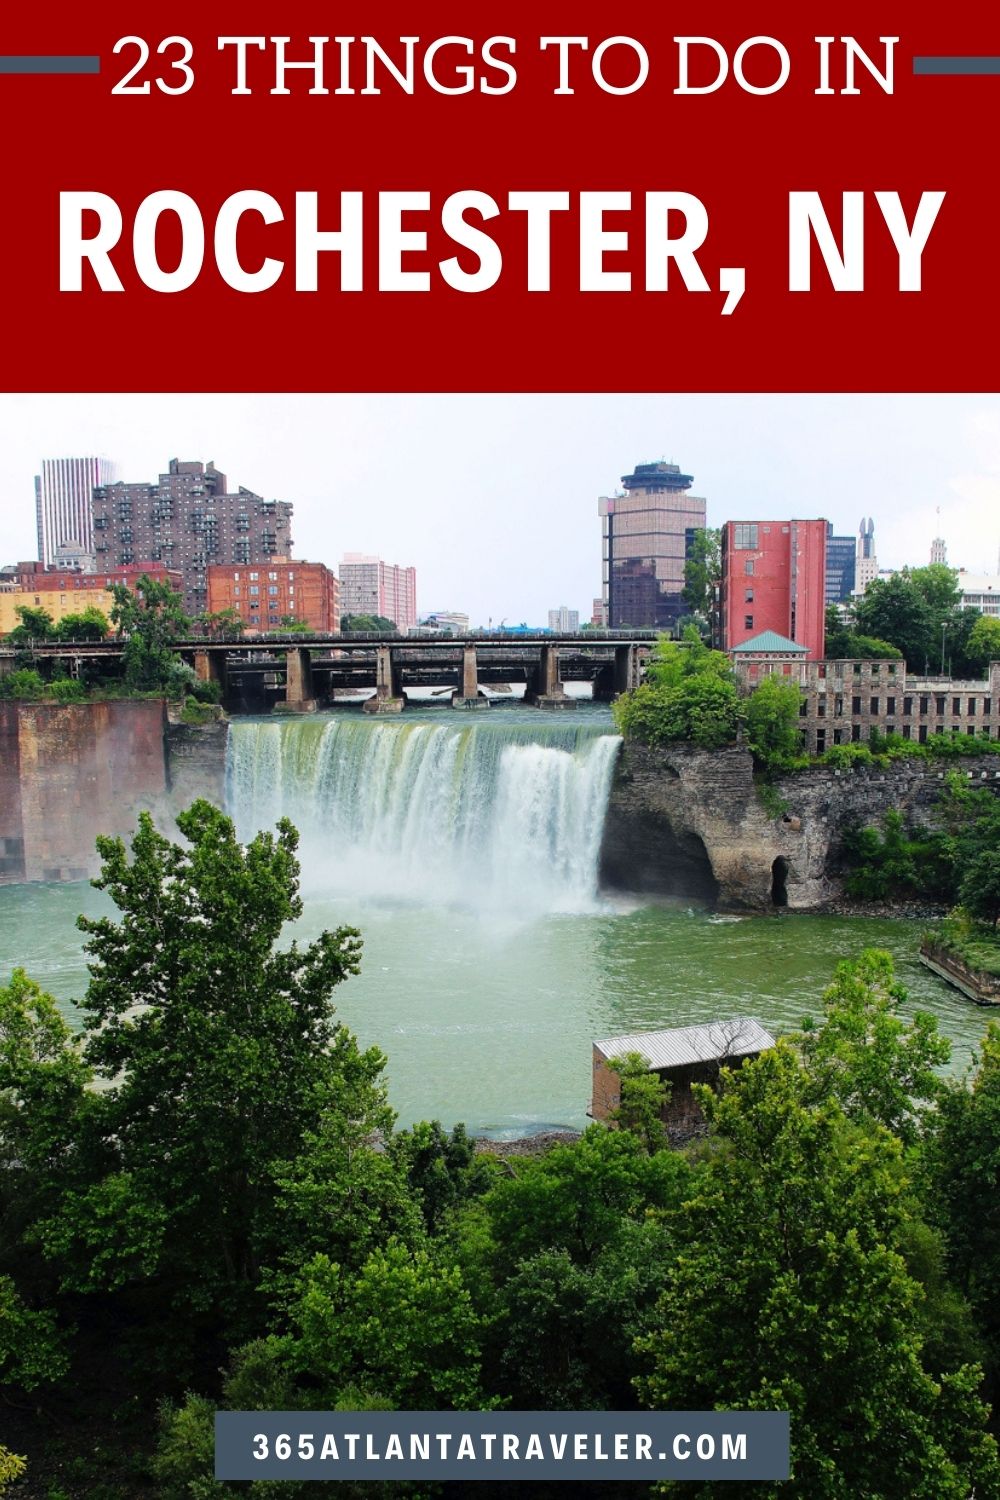 23 Things To Do in Rochester NY (and the Finger Lakes)